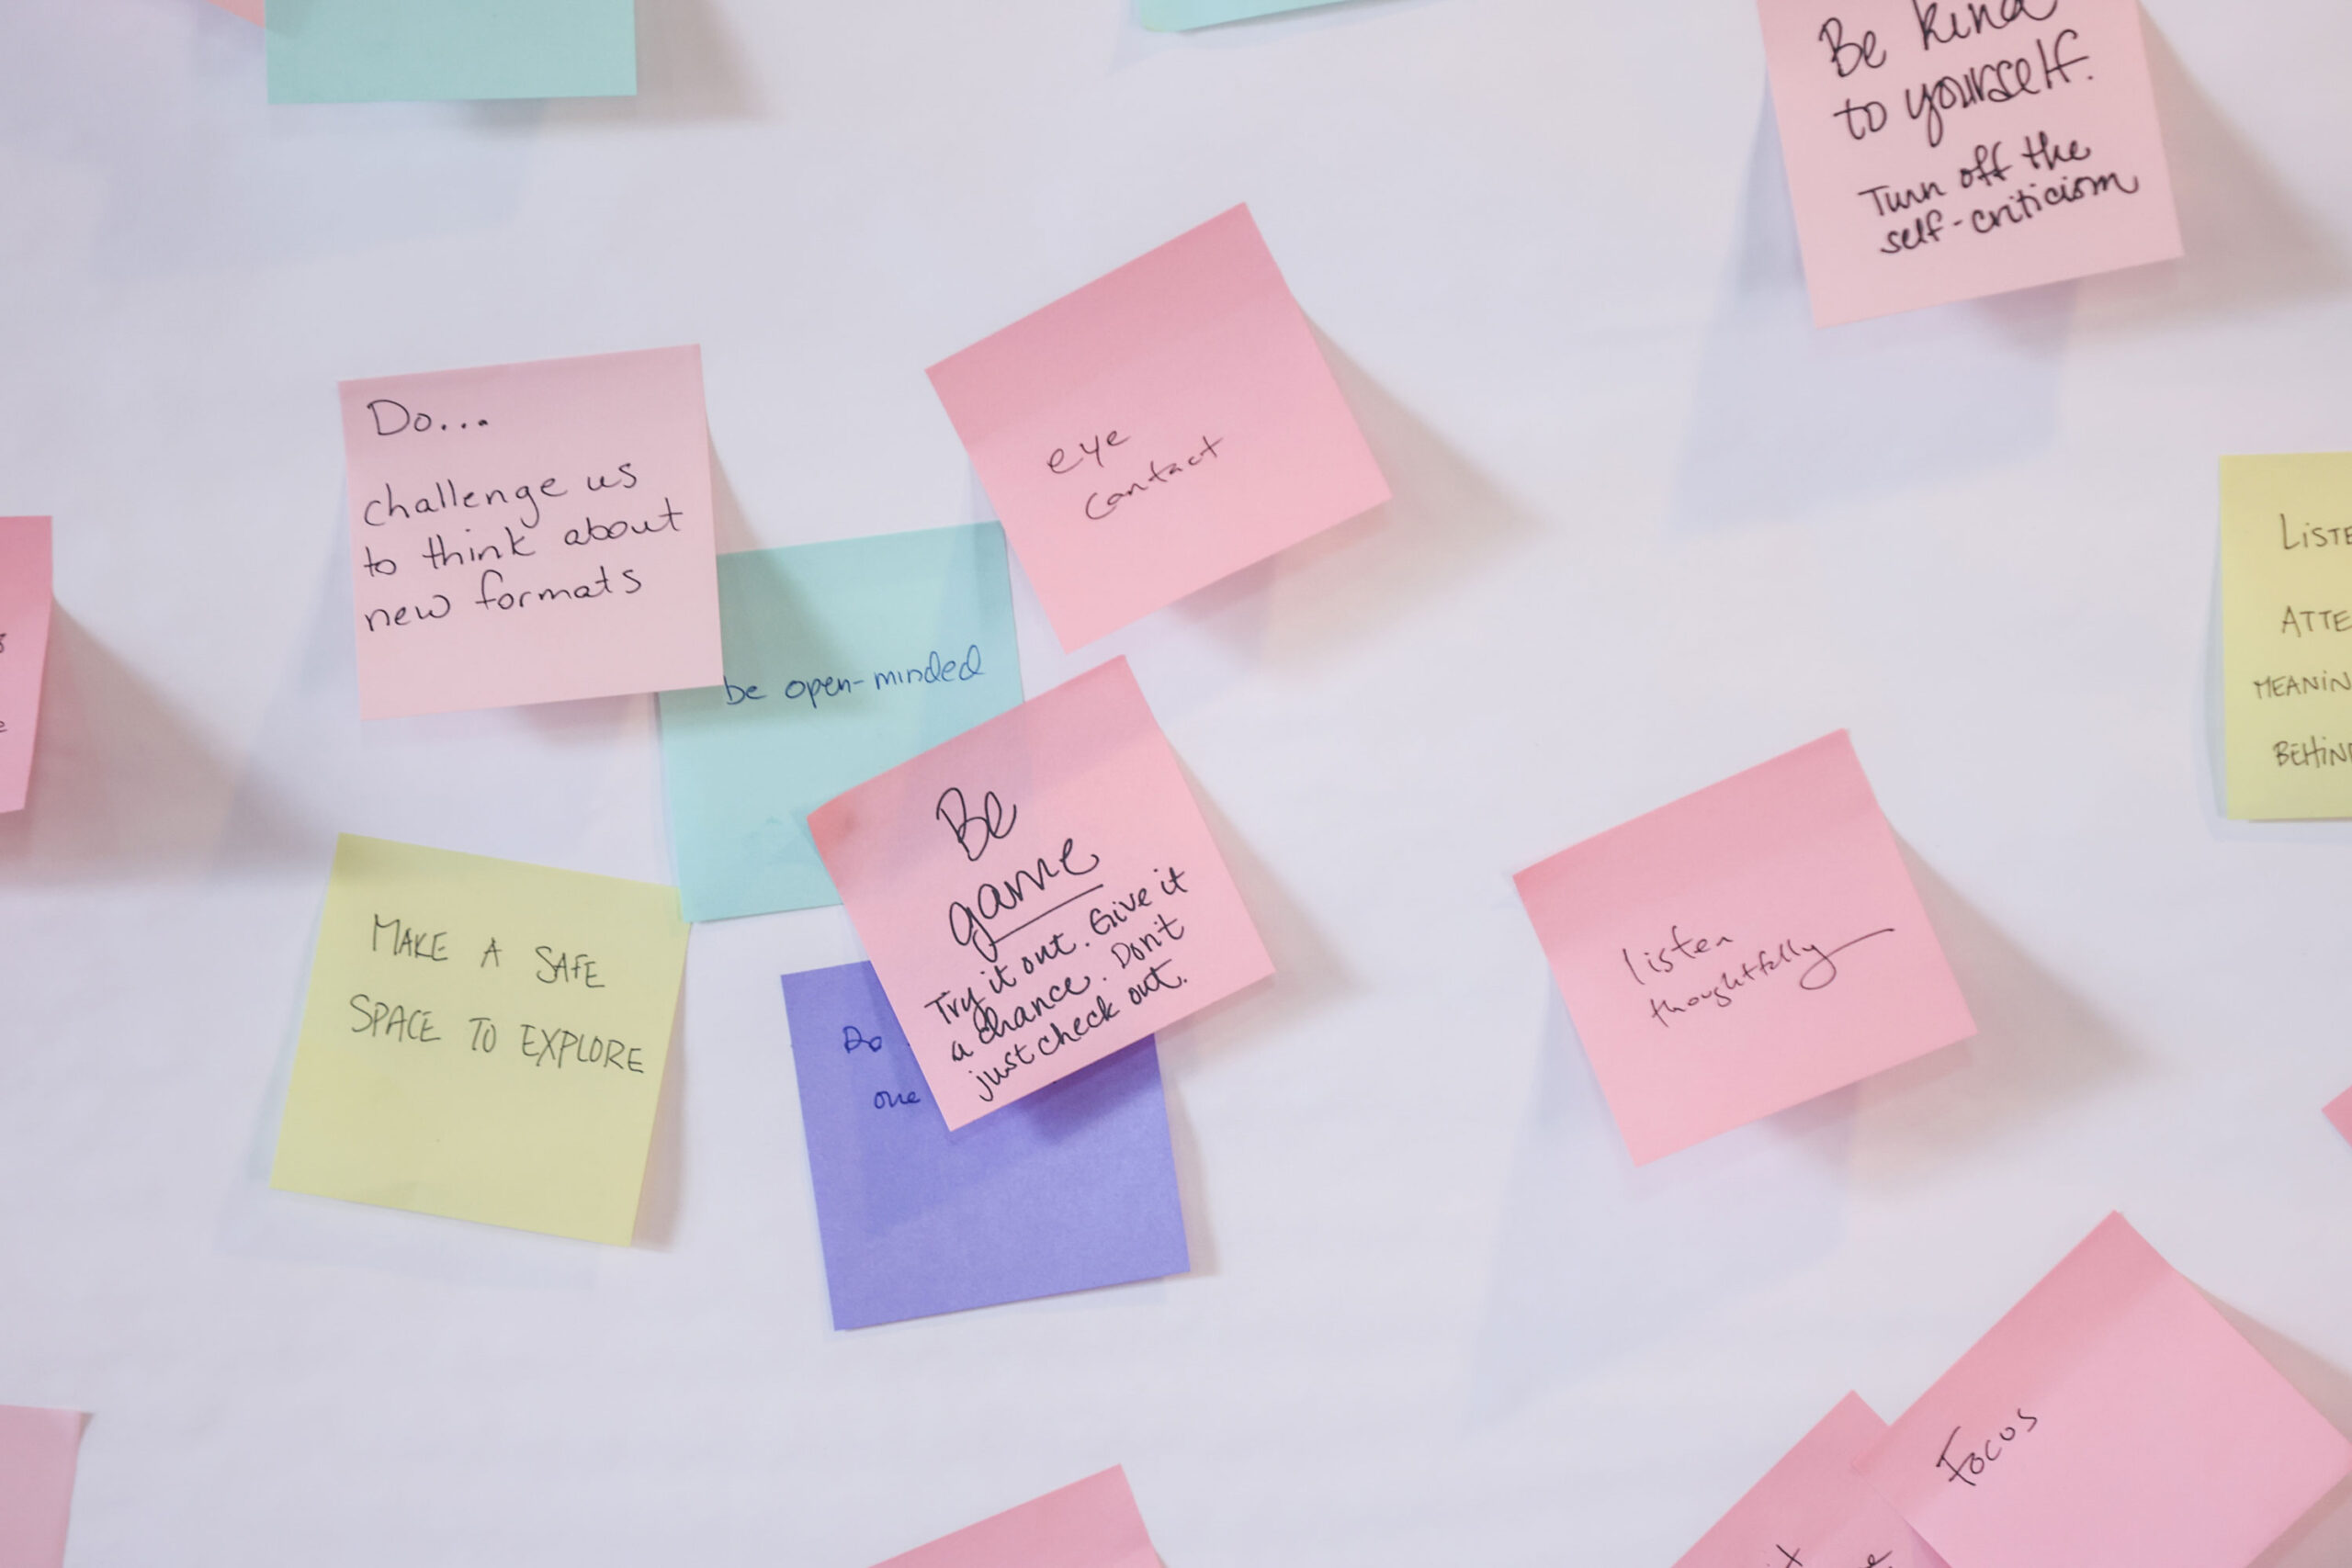 closeup of sticky notes, attached to a white board, with messages such as "listen thoughfully" and "be kind to yourself"